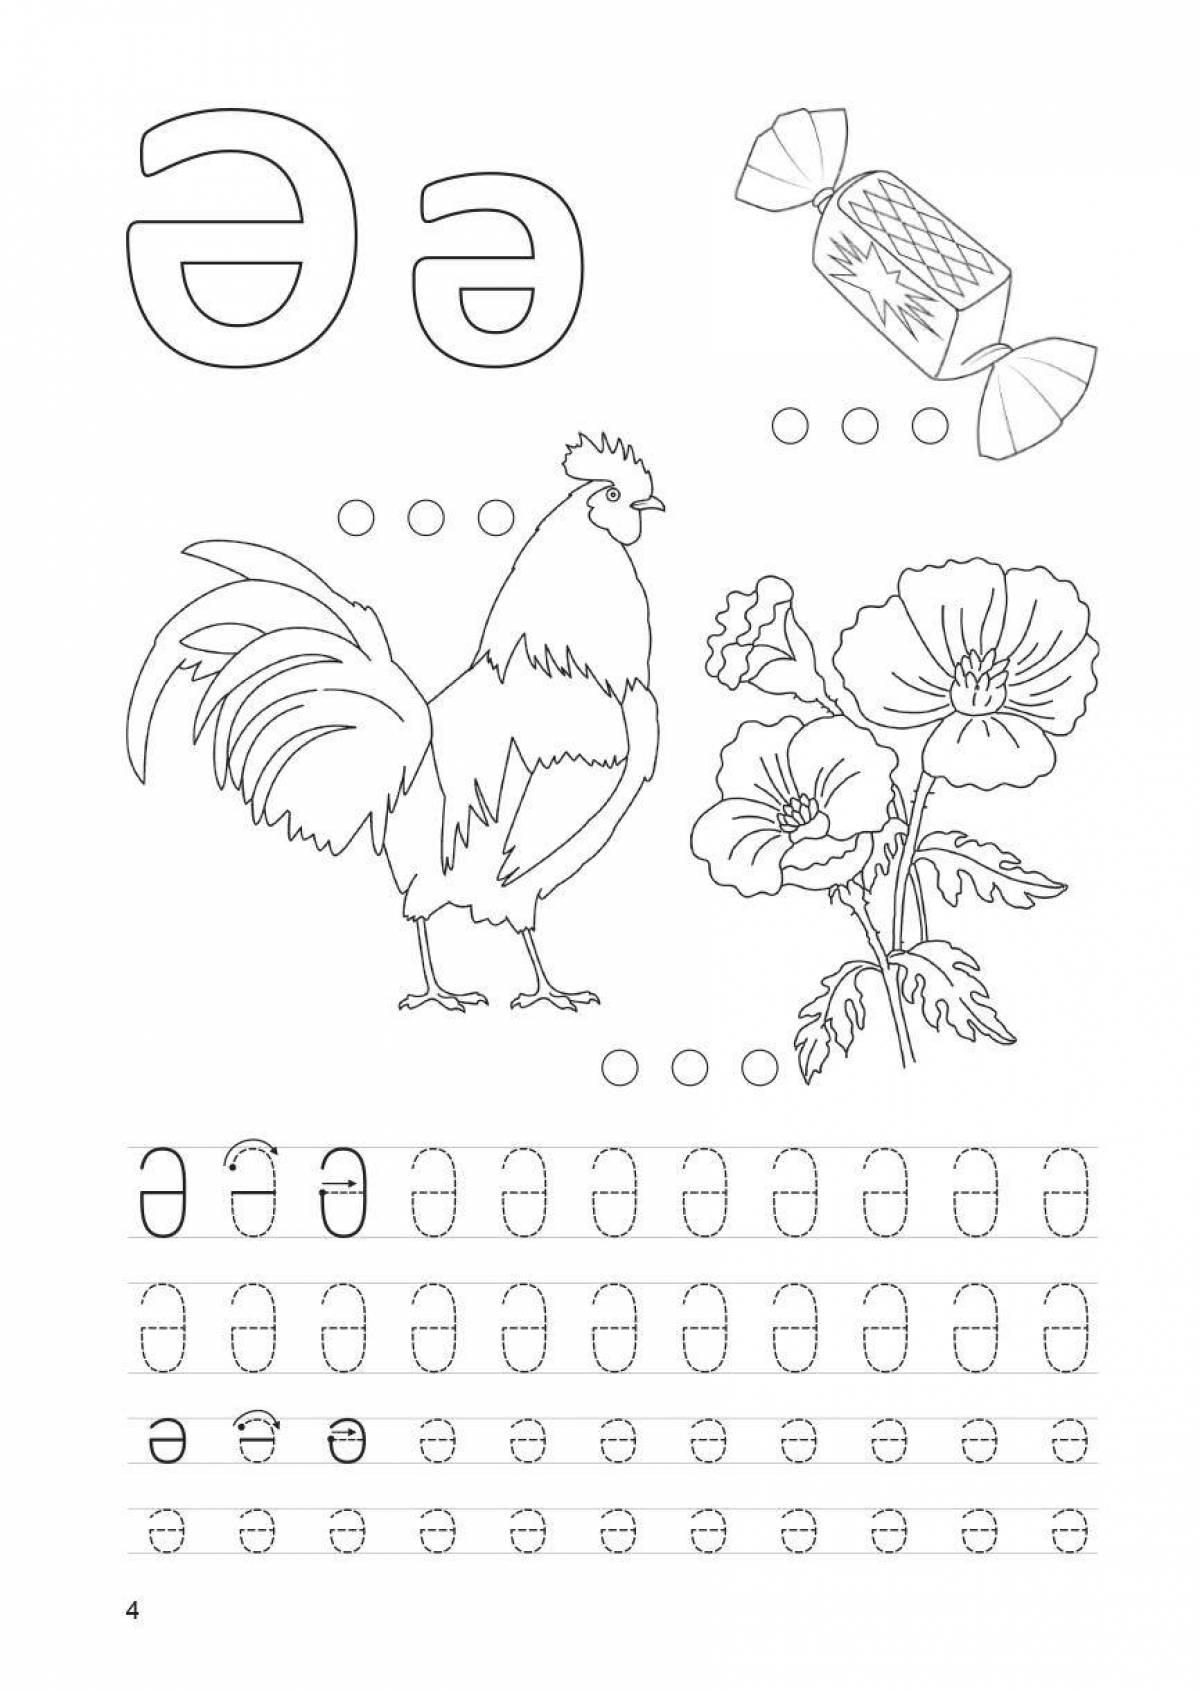 Coloring page amazing arіpter қазақша